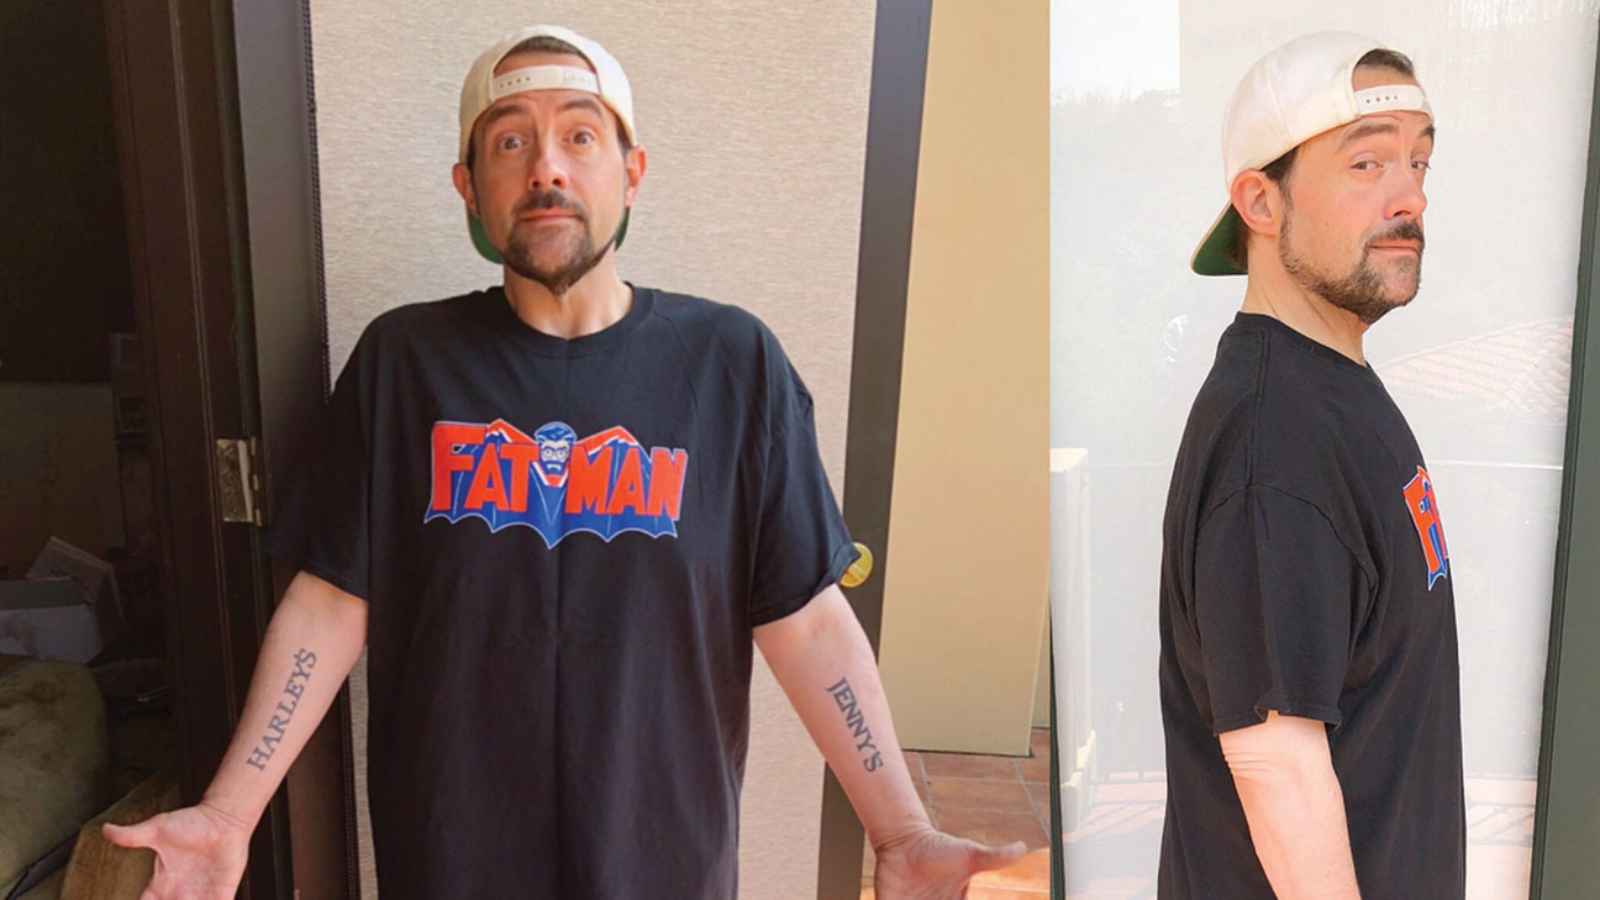 Kevin Smith Weight Loss Journey